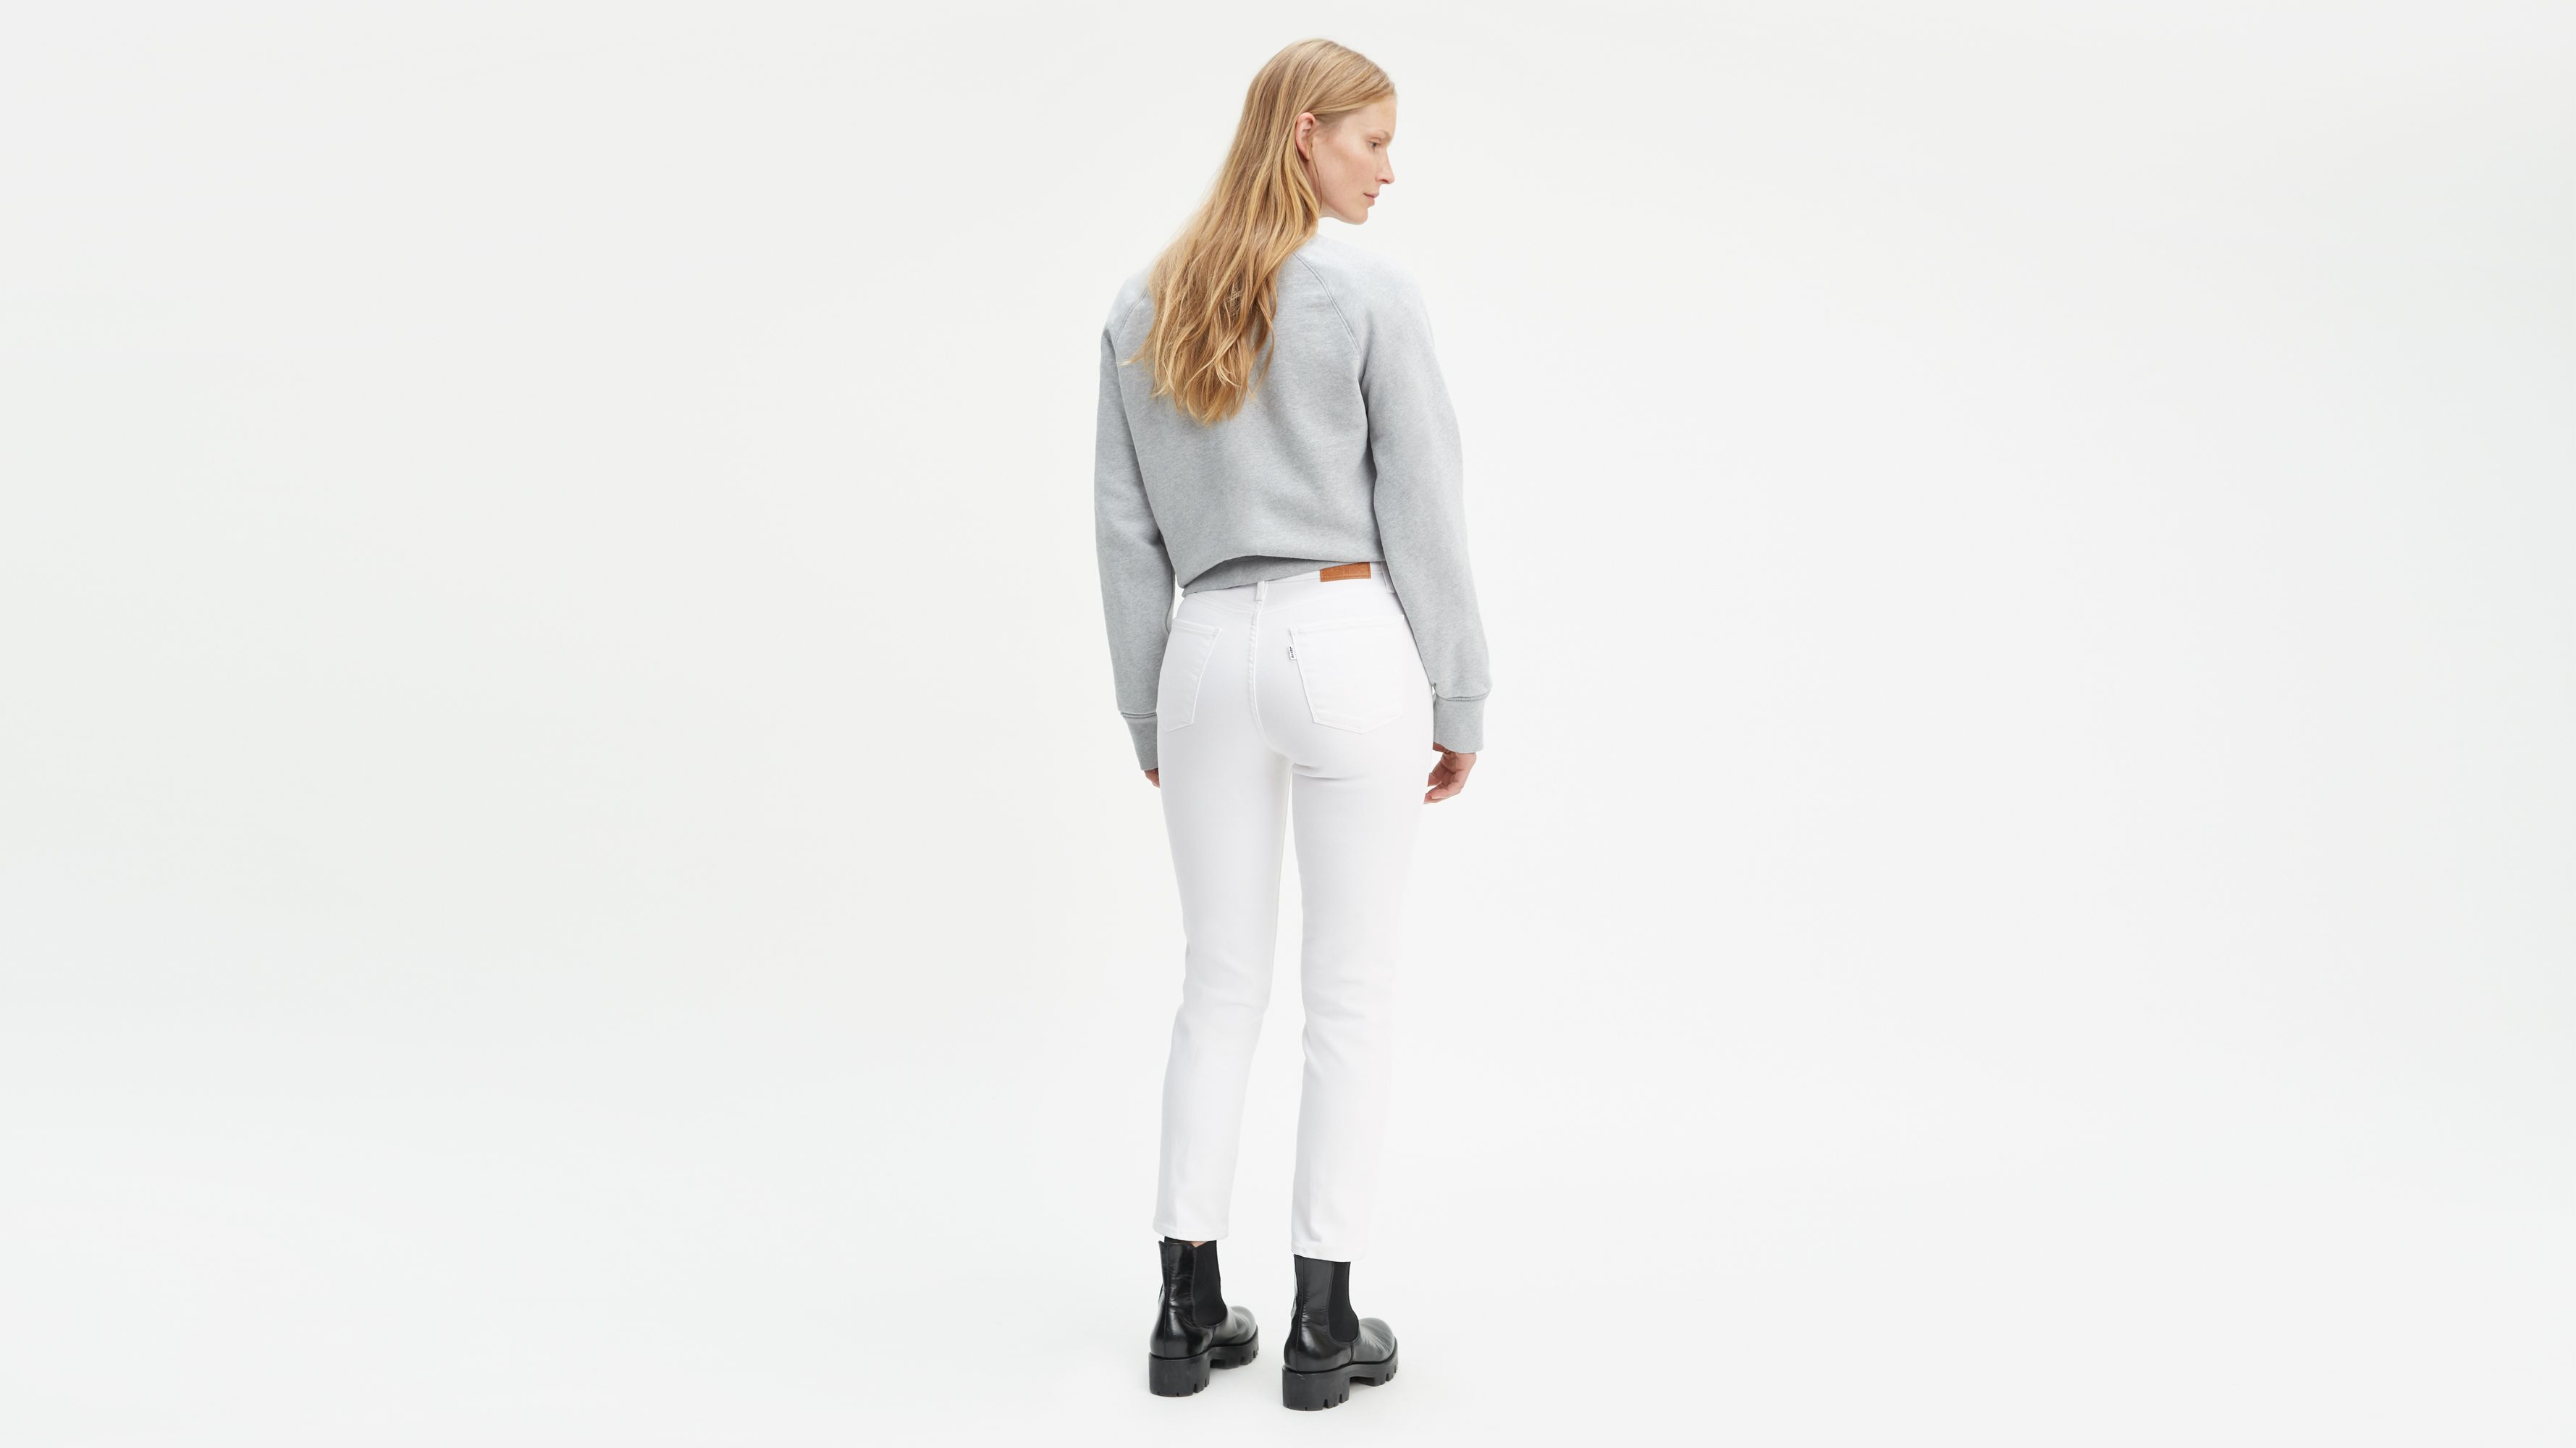 levi's high rise white jeans